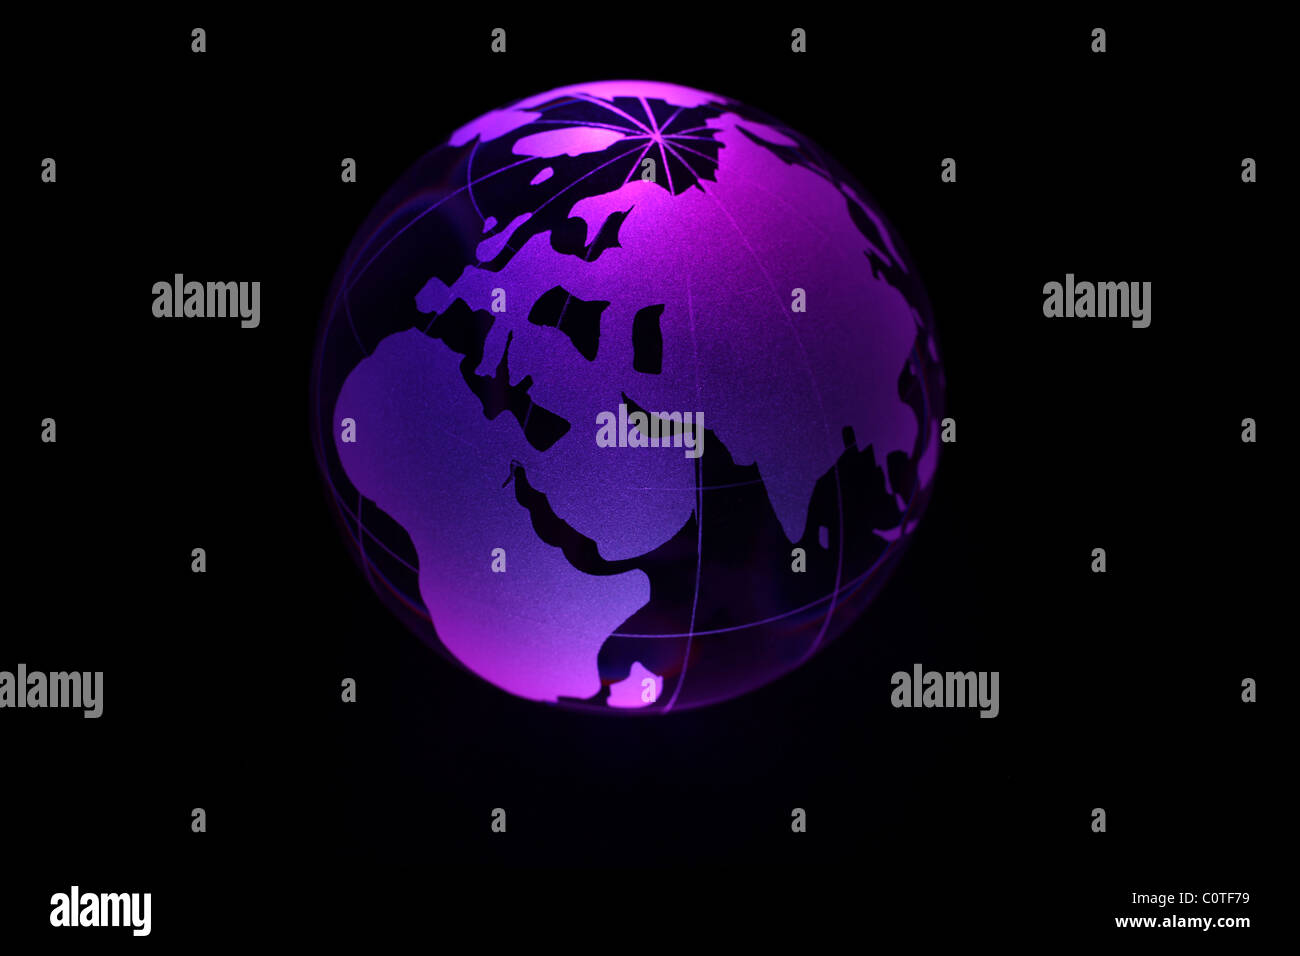 Earth planet,Purple globe for background Stock Photo